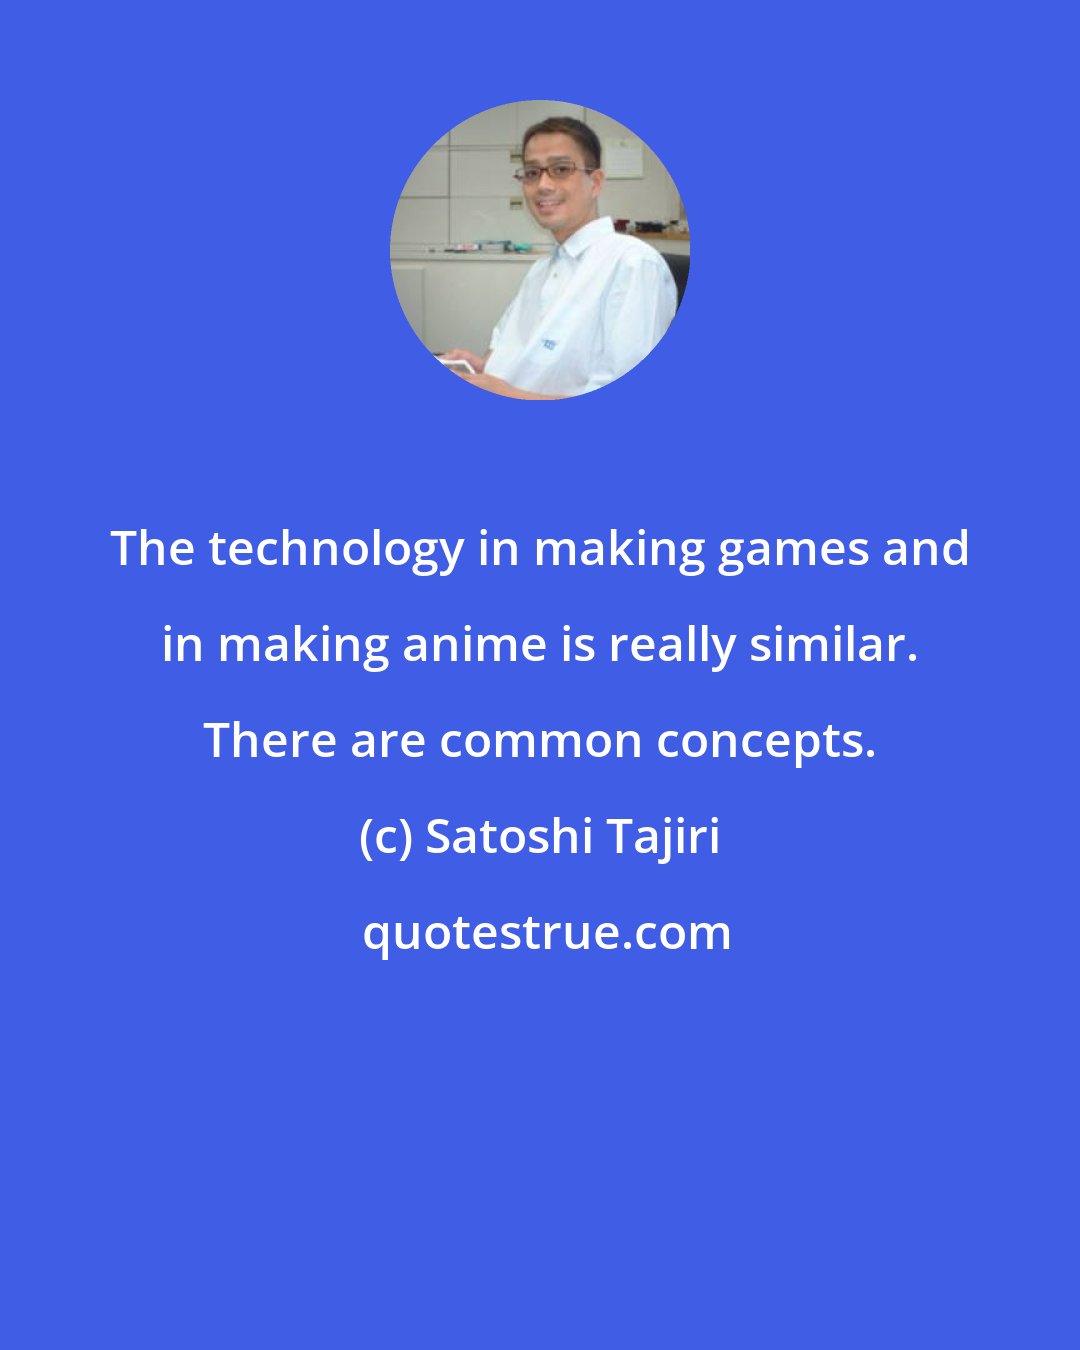 Satoshi Tajiri: The technology in making games and in making anime is really similar. There are common concepts.